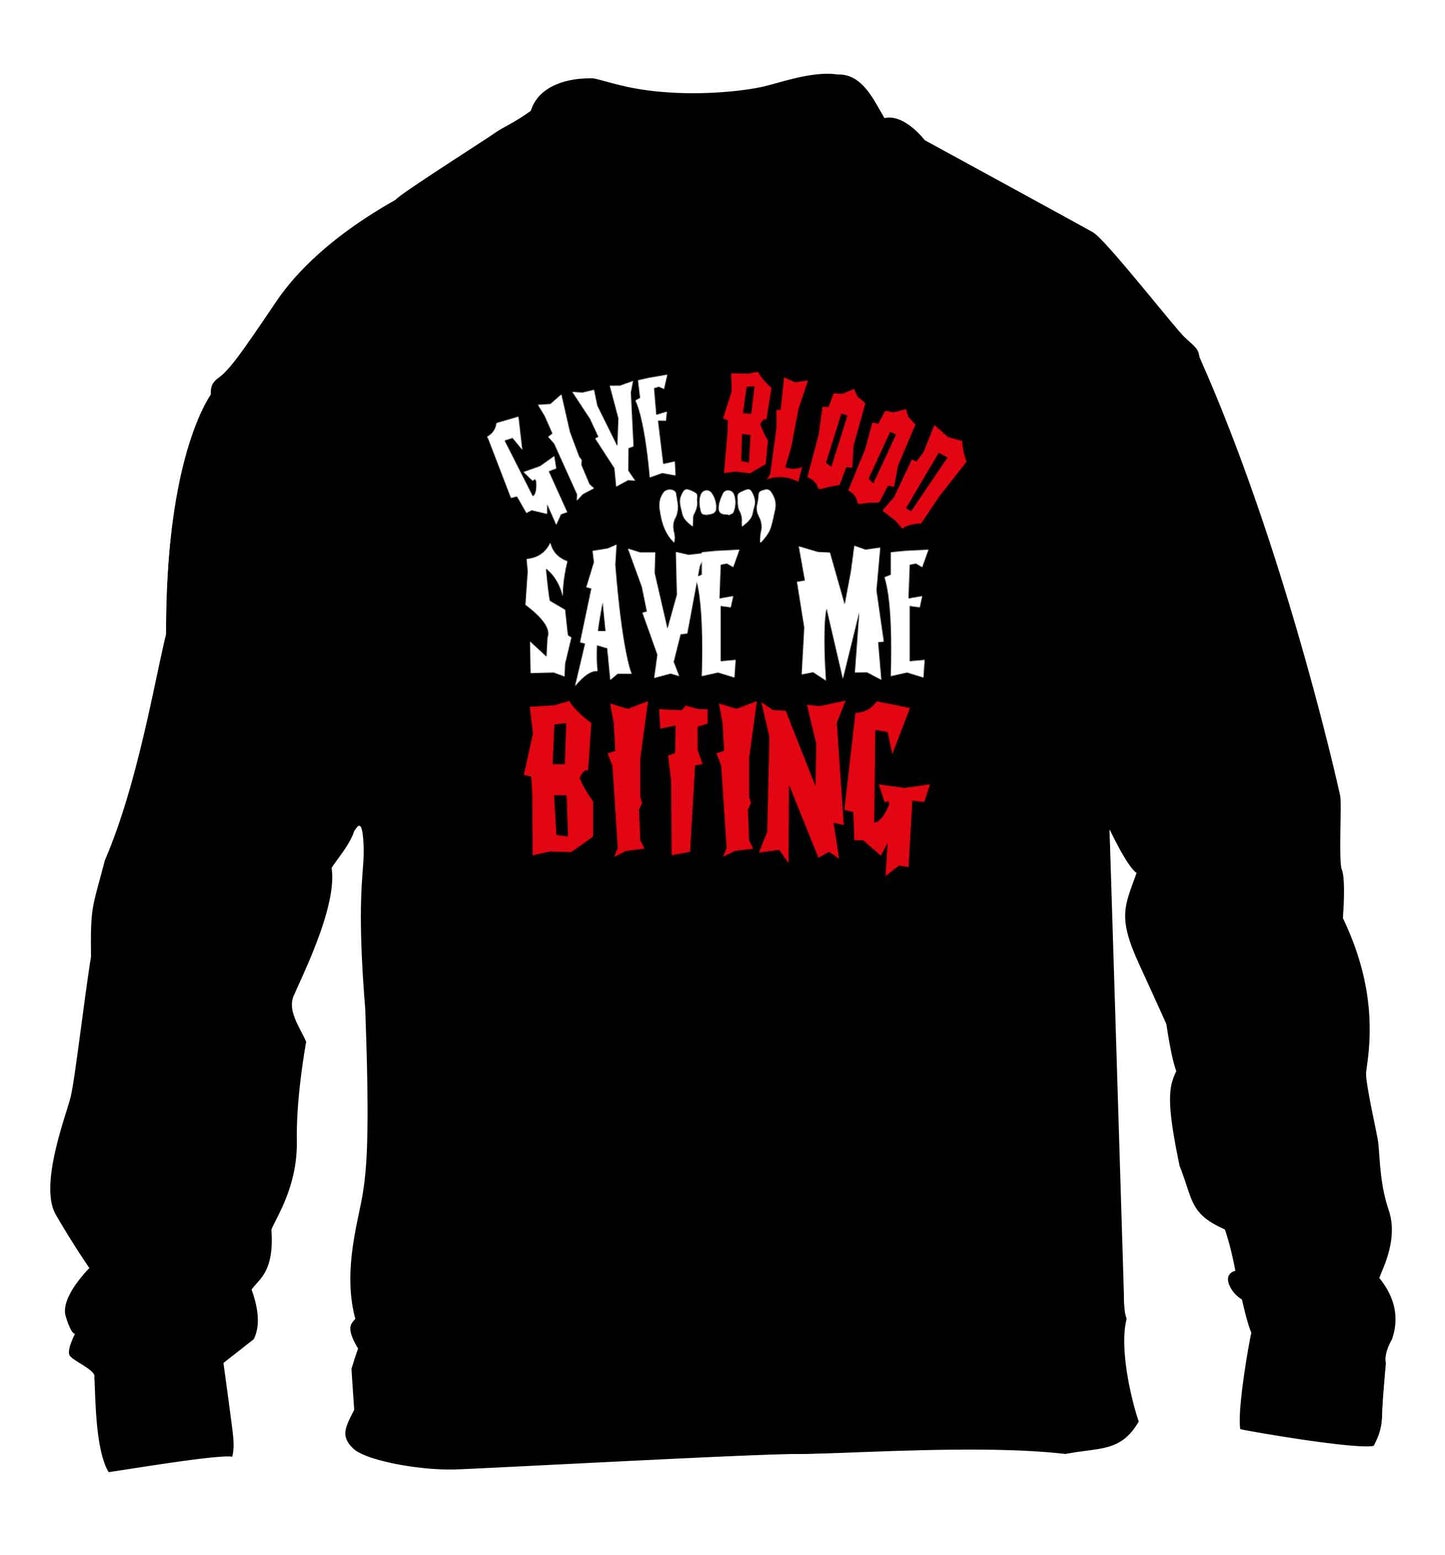 Give blood save me biting children's black sweater 12-13 Years